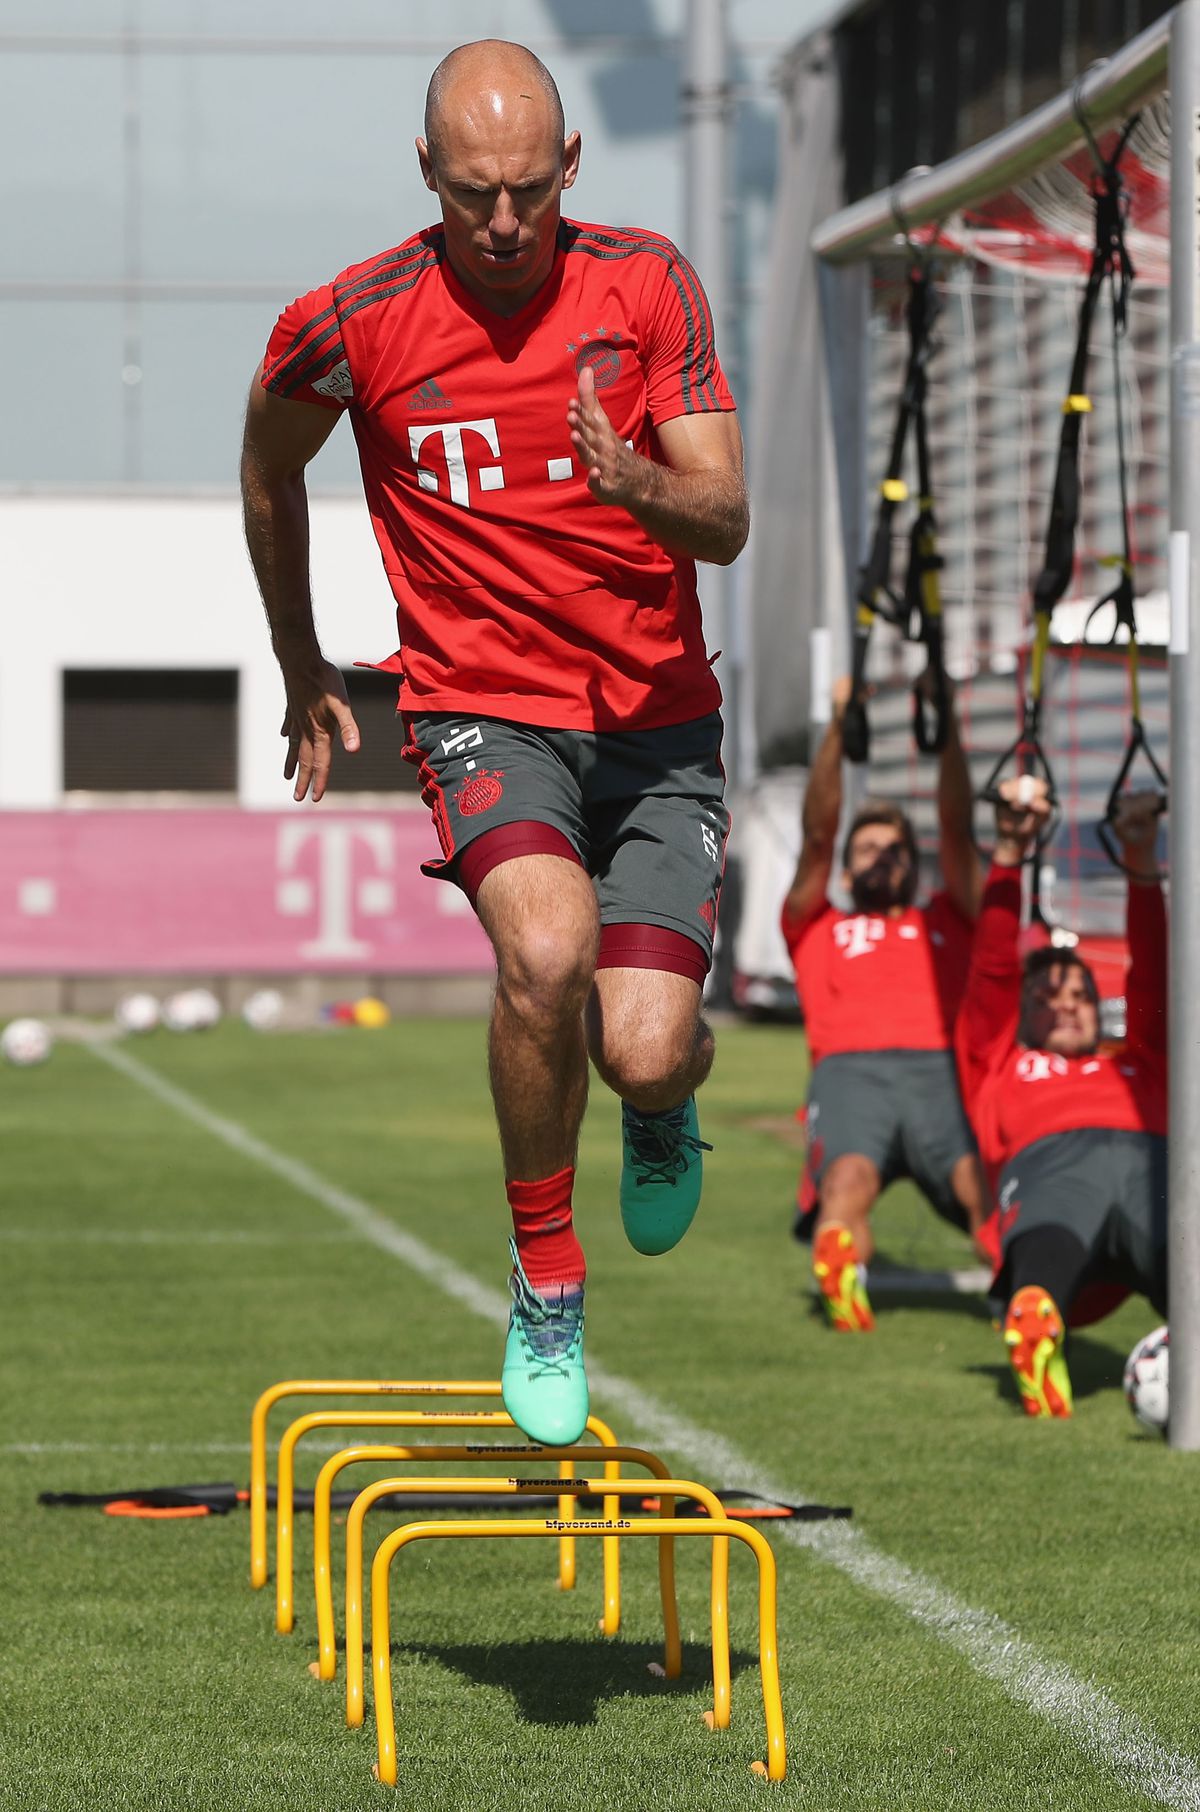 FC Bayern Muenchen - Training Session
MUNICH, GERMANY - JULY 12: Arjen Robben of FC Bayern Muenchen practices during a training session at the club's Saebener Strasse training ground on July 12, 2018 in Munich, Germany